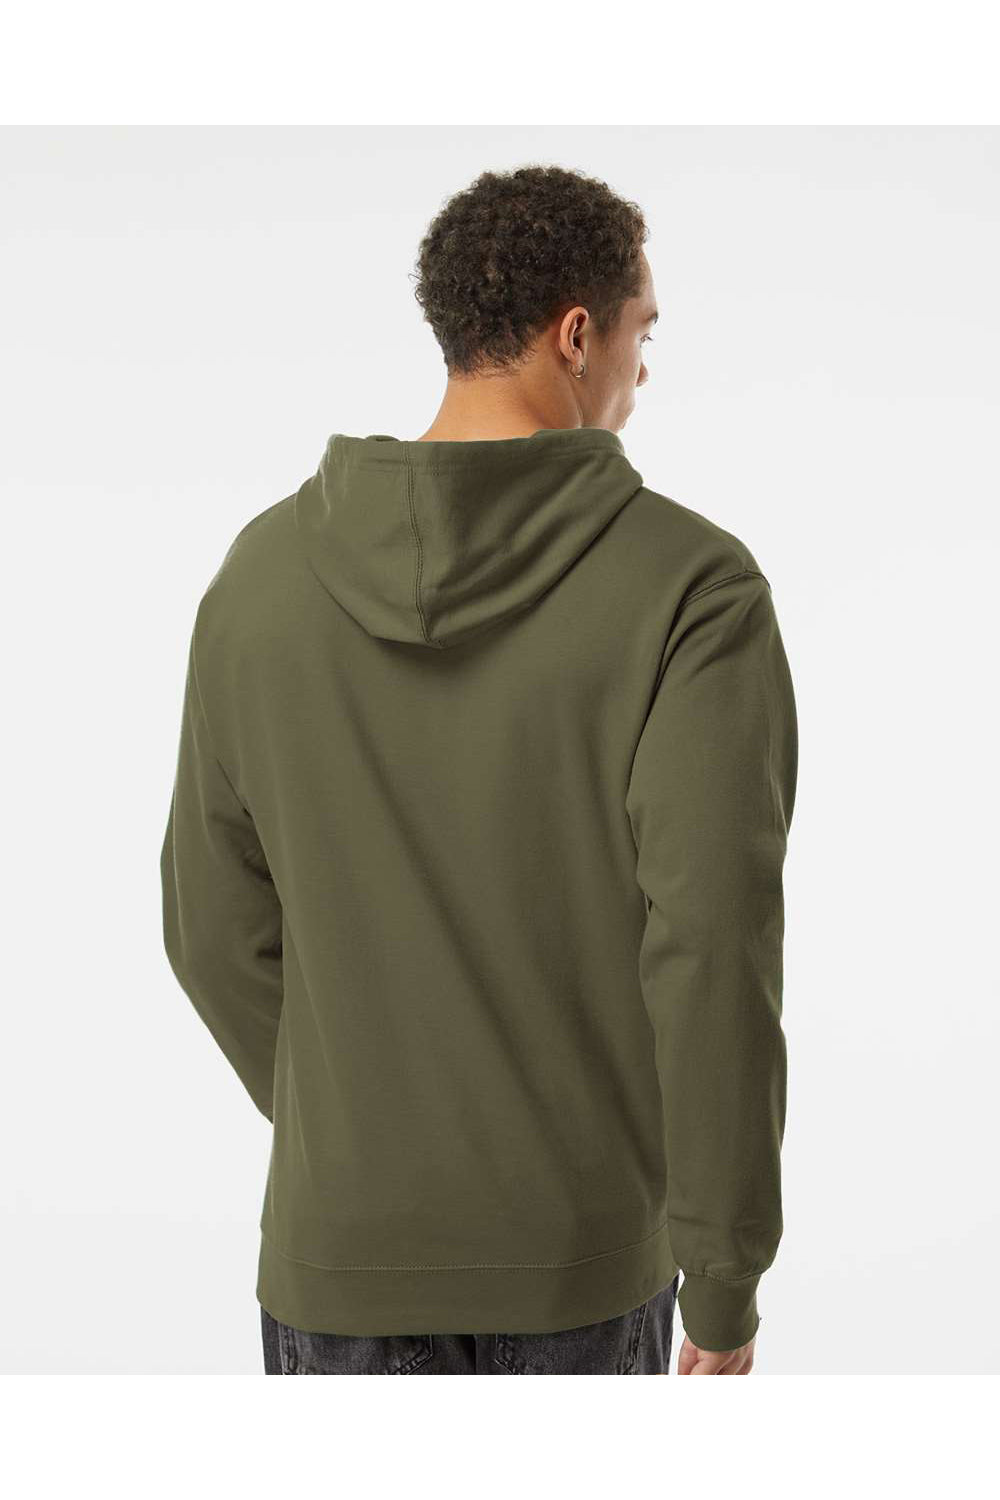 Independent Trading Co. SS4500 Mens Hooded Sweatshirt Hoodie Army Green Model Back